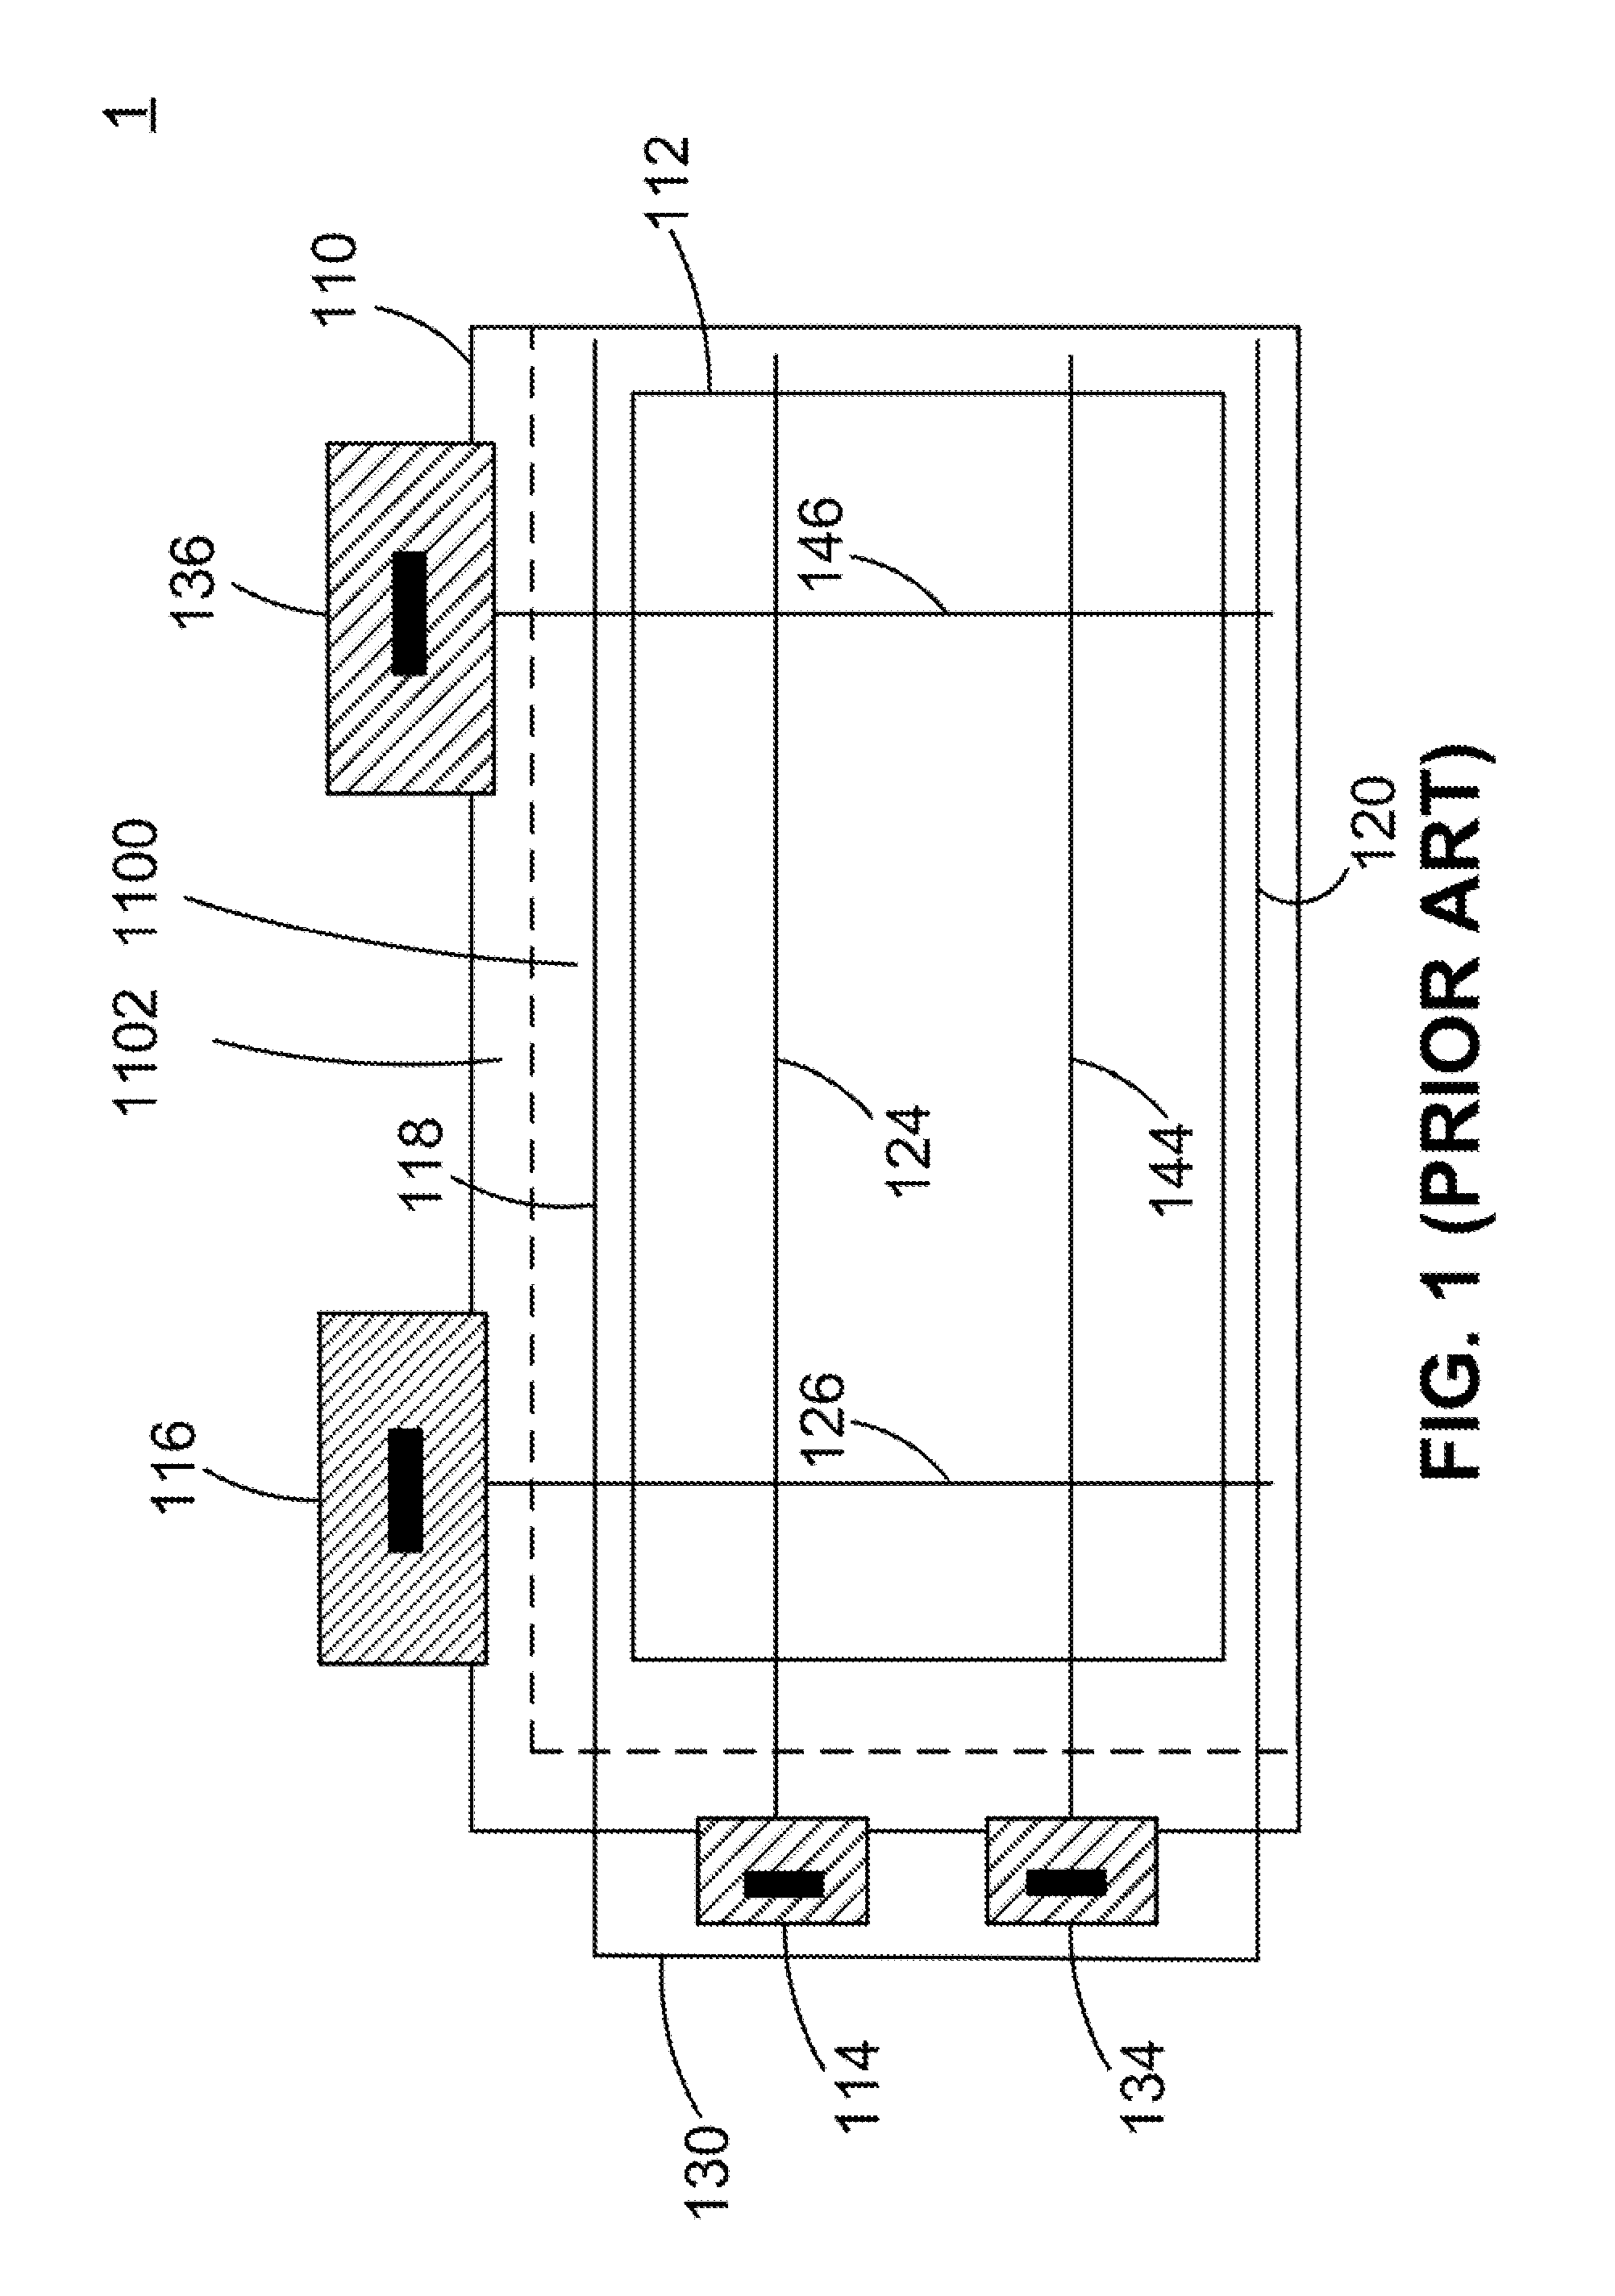 Display device and repairing method for the same